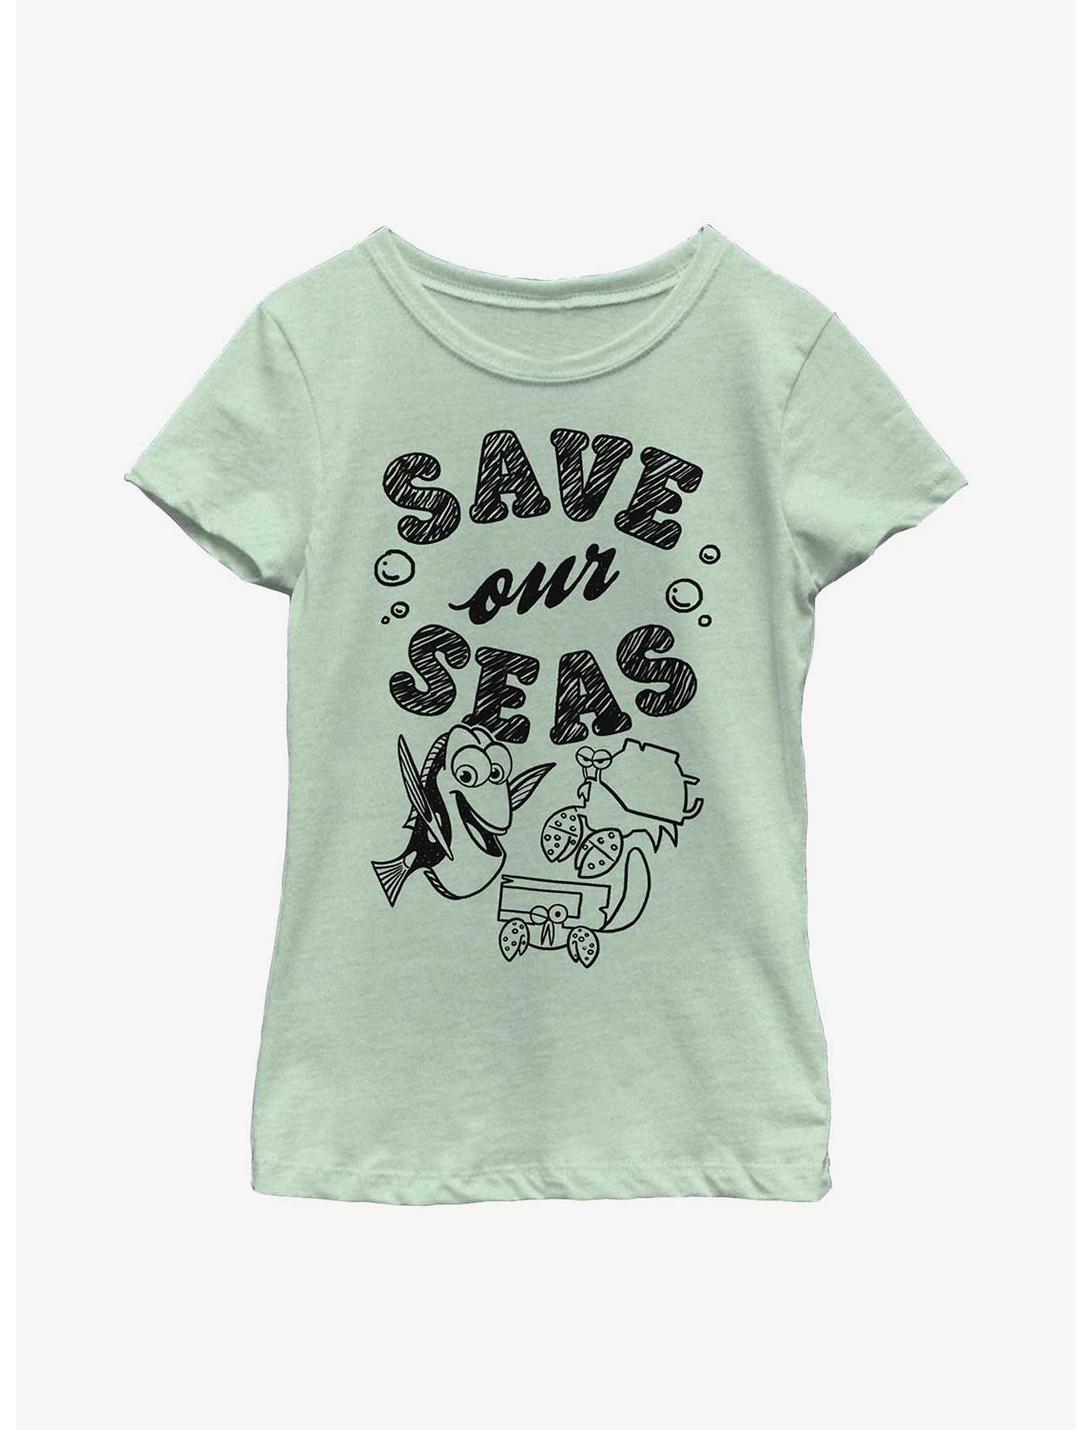 Disney Pixar Finding Nemo Save Our Seas Dory Youth Girls T-Shirt, MINT, hi-res